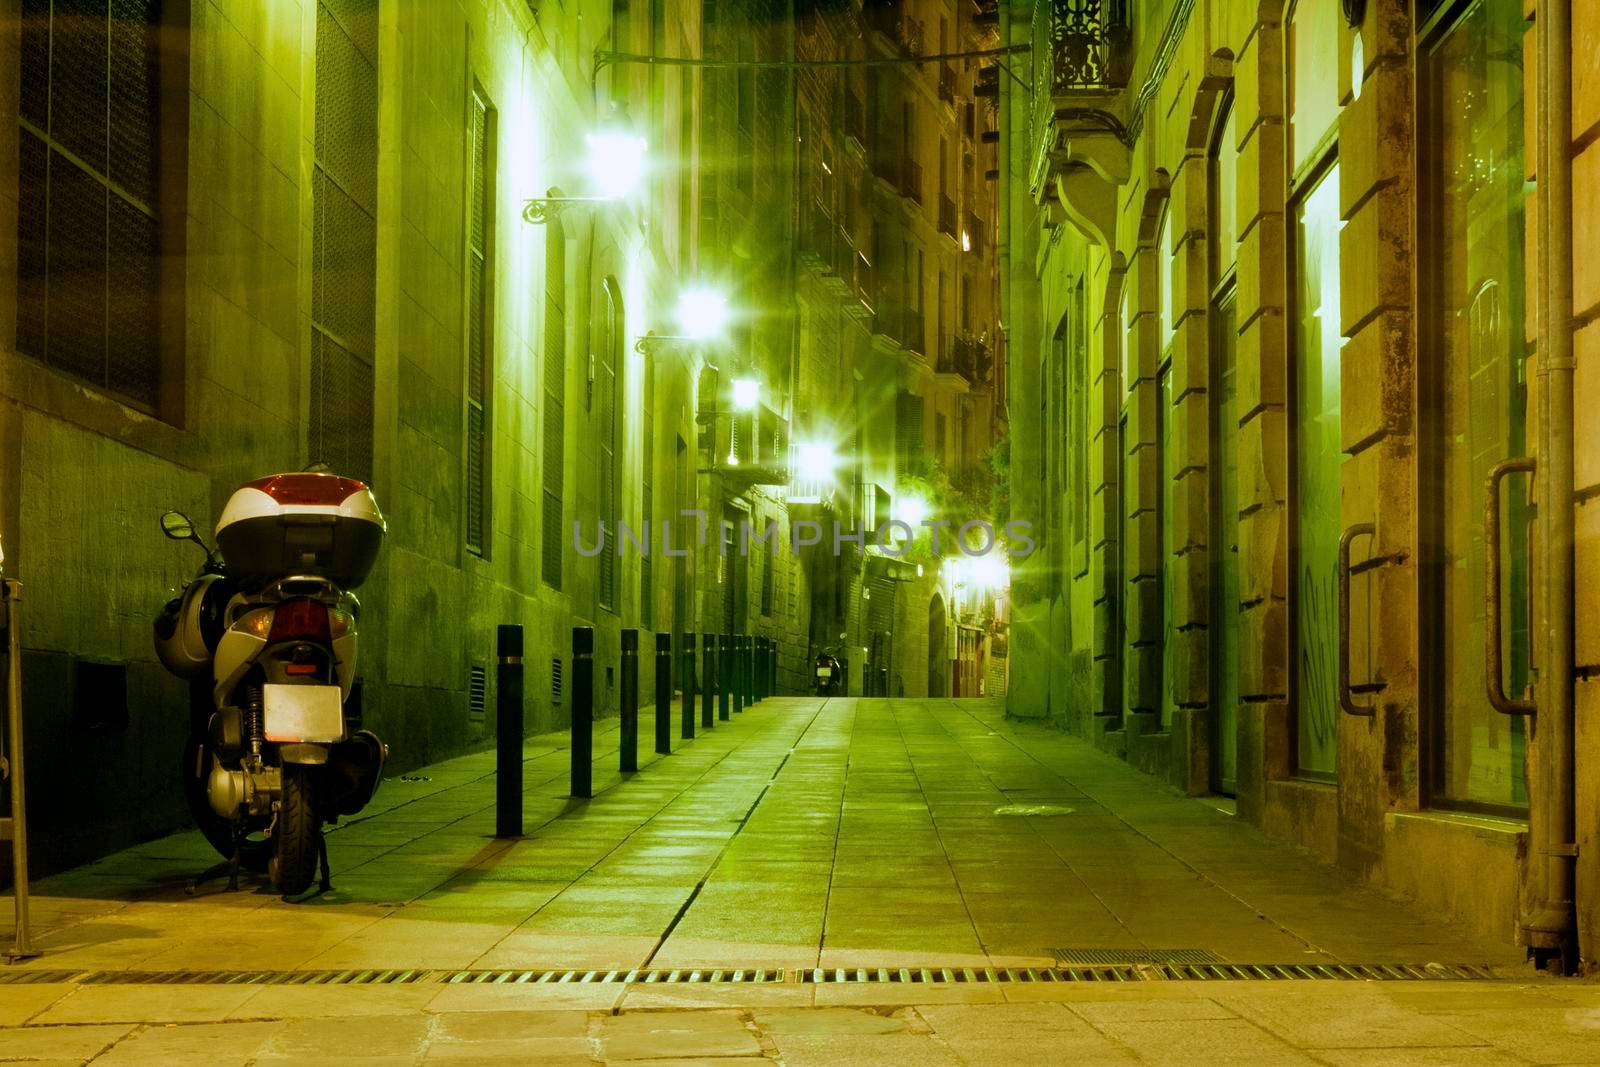 illuminated Barcelona night street in famous Gothic Quarter district